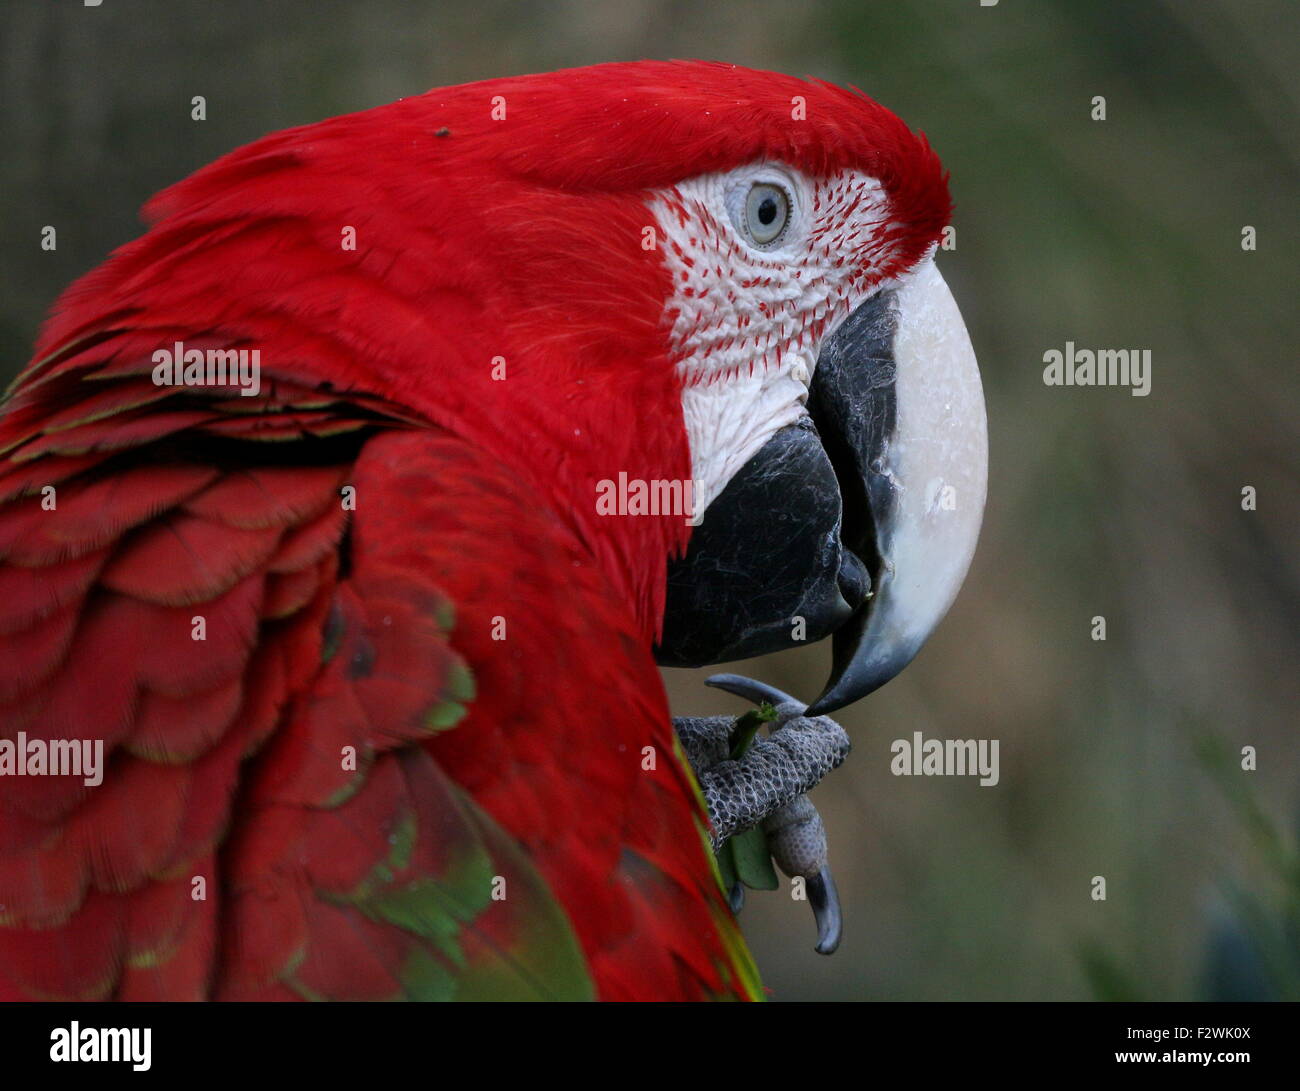 South American Red-and-green Macaw (Ara chloropterus) a.k.a Green winged Macaw. Close-up of head and beak Stock Photo